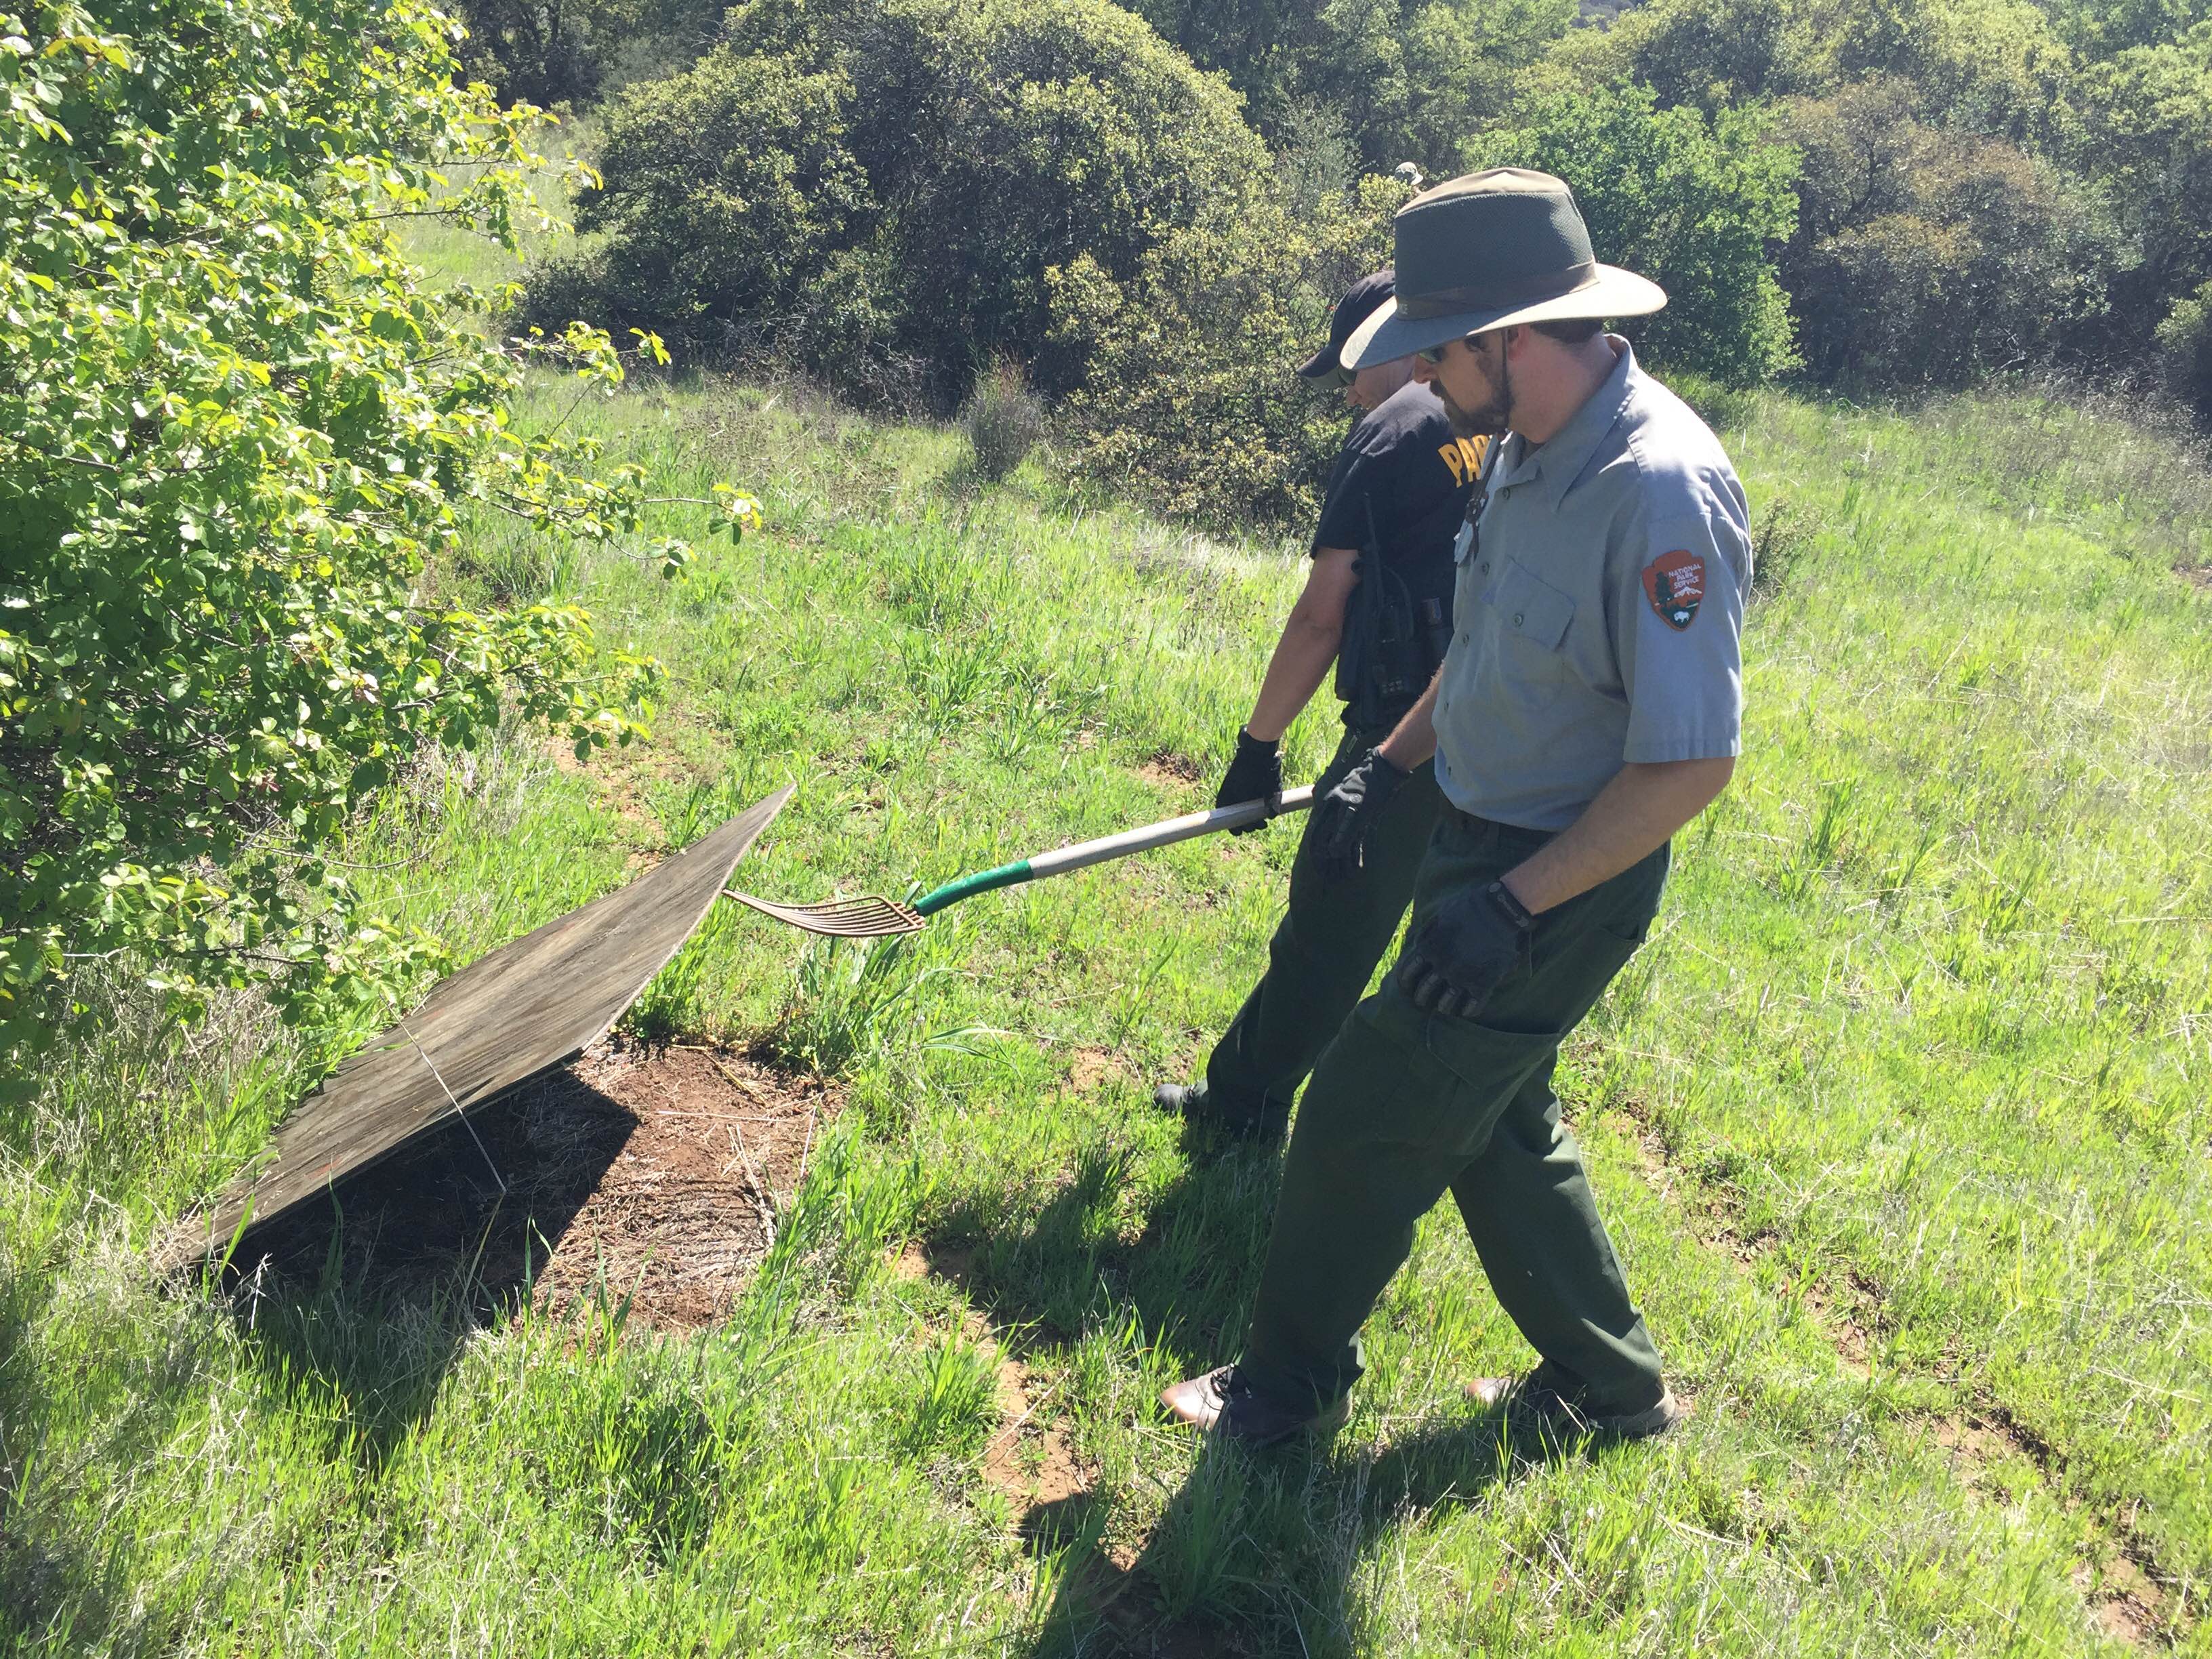 Rangers carefully lift a plywood board during a clean-up. (Photo: National Park Service)